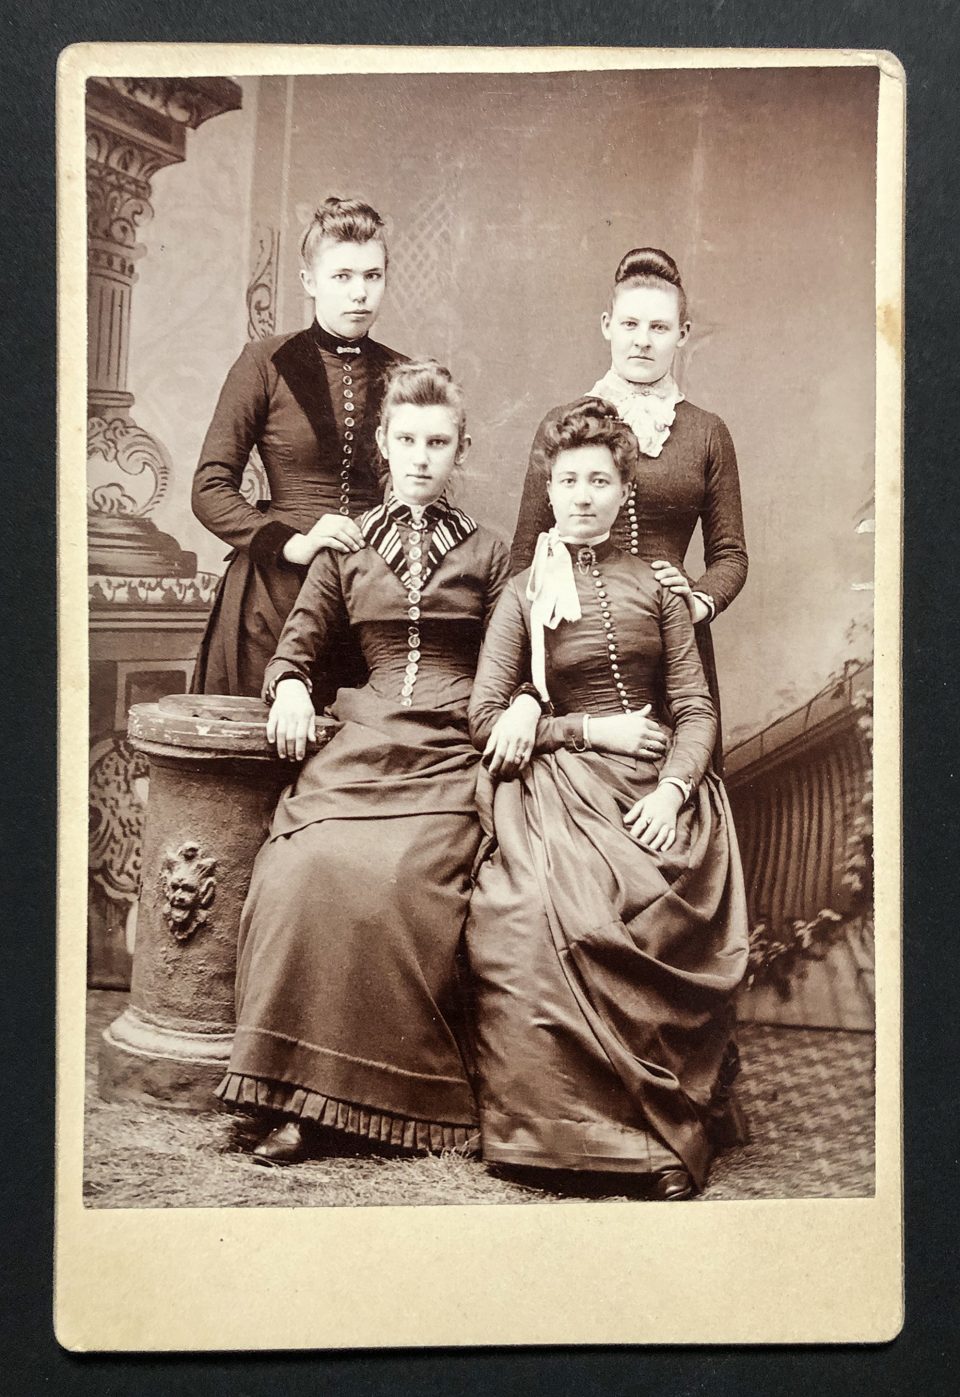 This cabinet card by photographer J.A. Reitz features an albumen print portrait of four young ladies in long cresses, with all apparently confined within the tight confines of corsets.